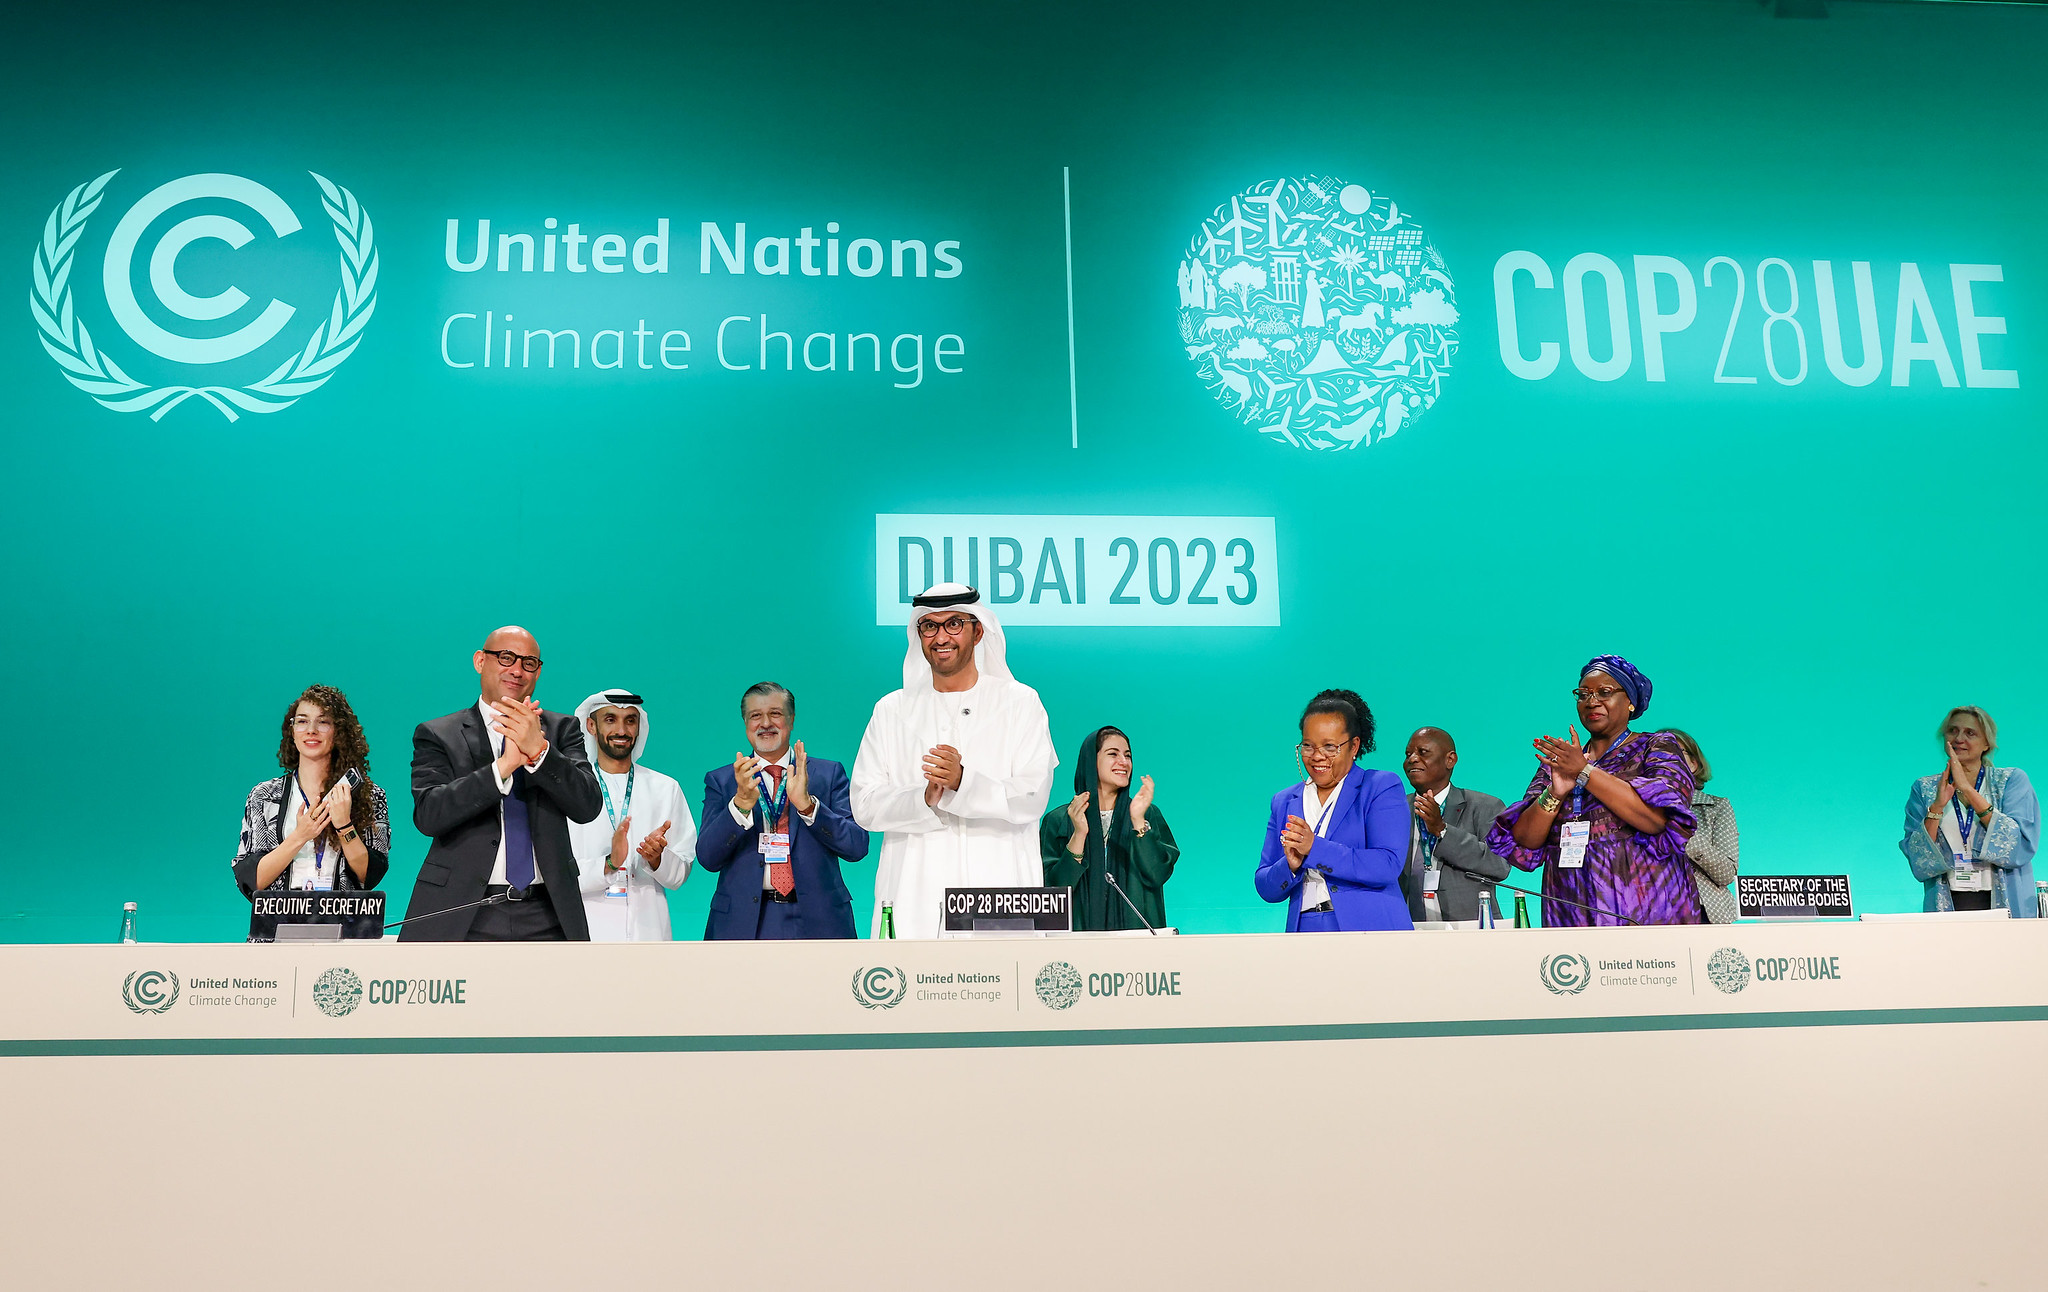 What was COP28 and was it successful?